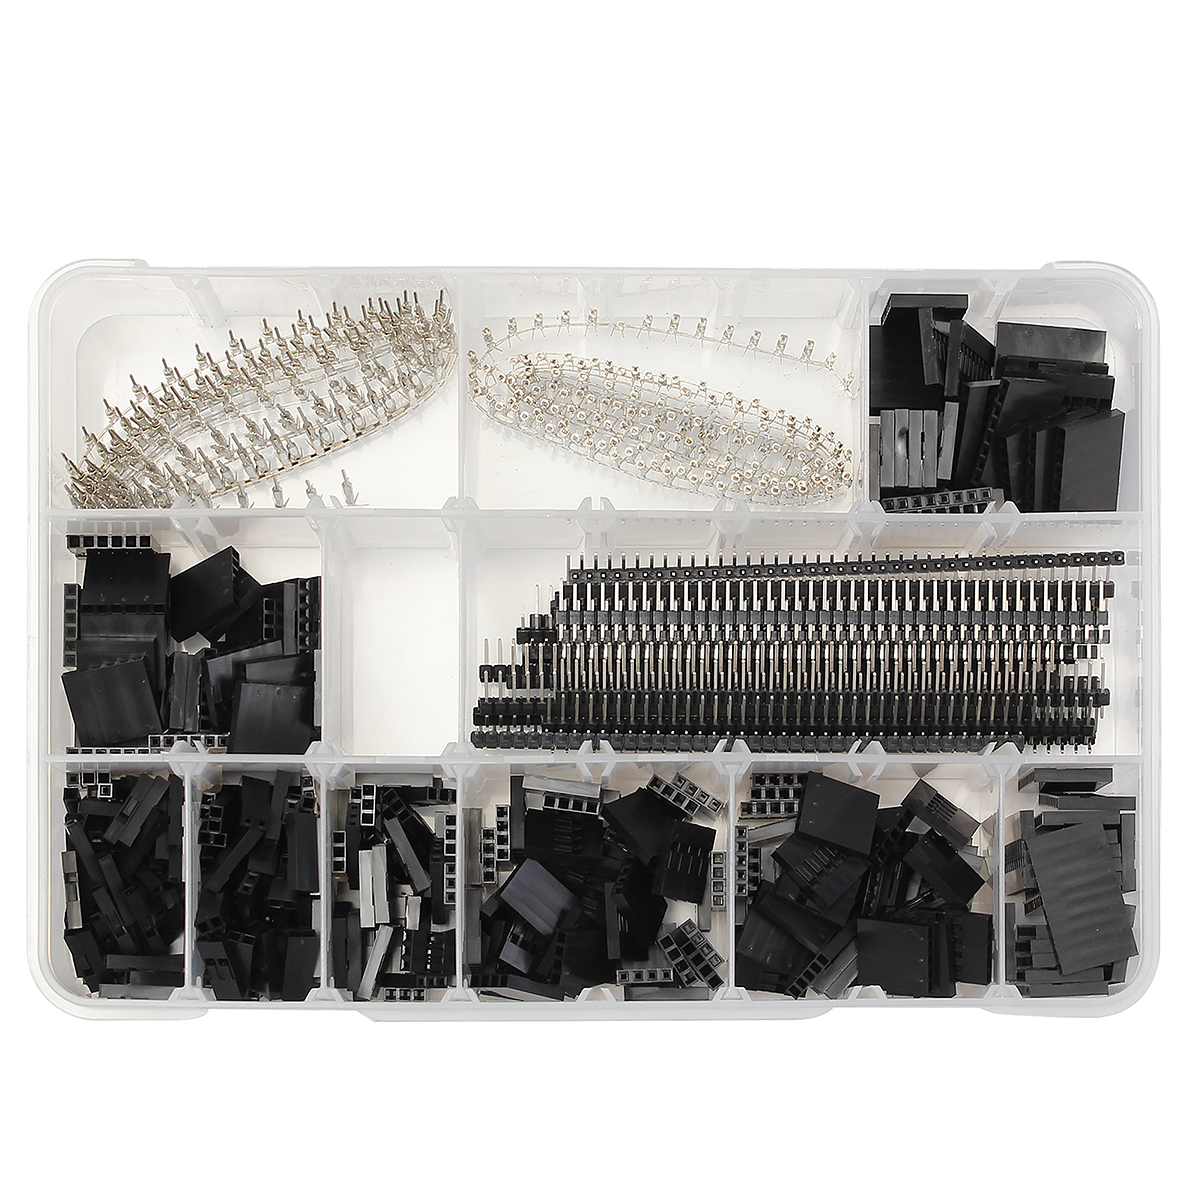 Geekcreit® 1450pcs 2.54mm Male Female Dupont Wire Jumper With Pin Header Connector Housing Kit 10